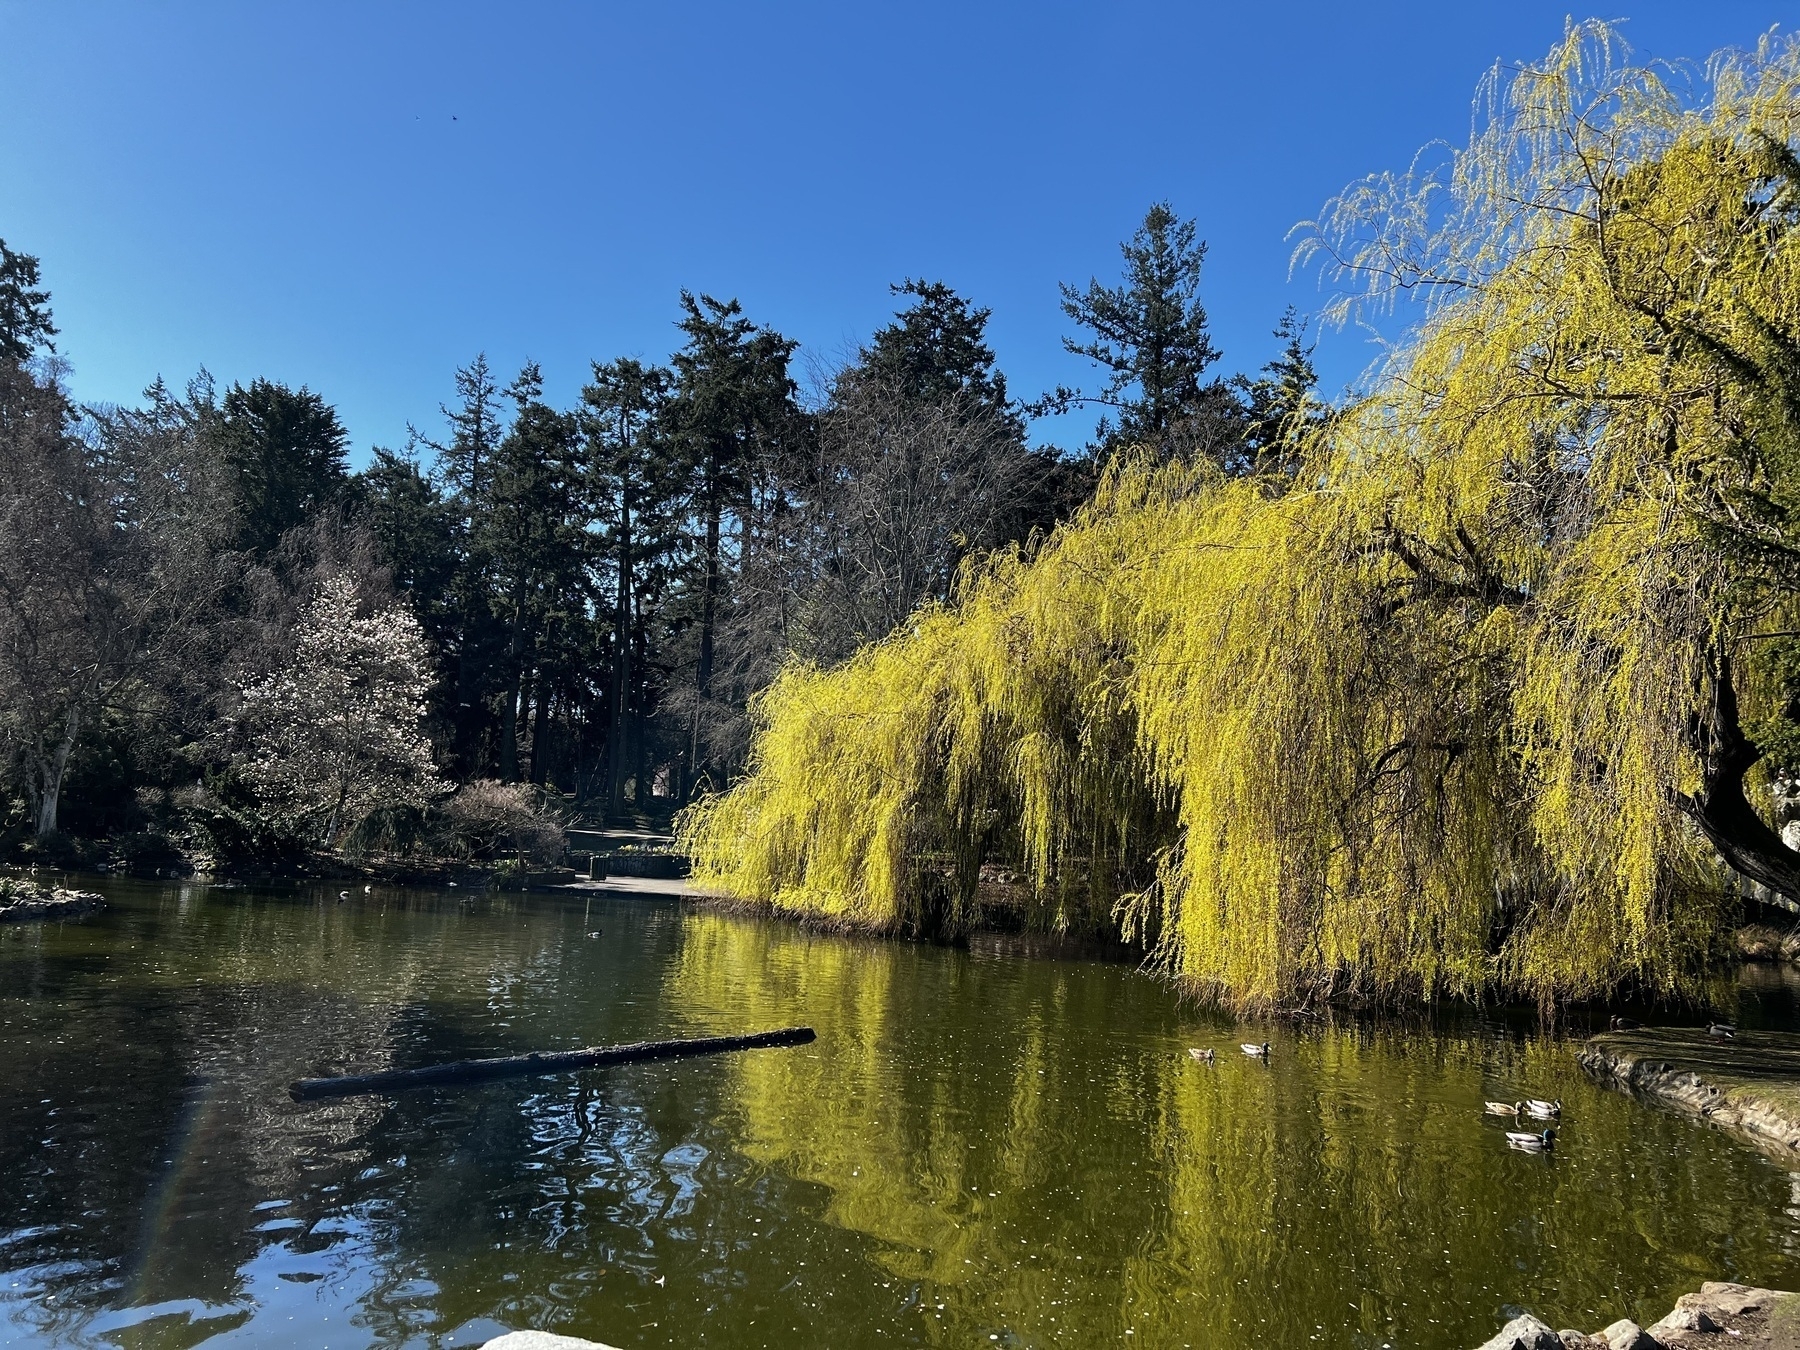 Photo of a circular pond. There are tall evergreen trees on the far shore, and ducks swimming on the right side. Behind the ducks, on the near shore, is a brilliant yellow tree, dropping towards the water.